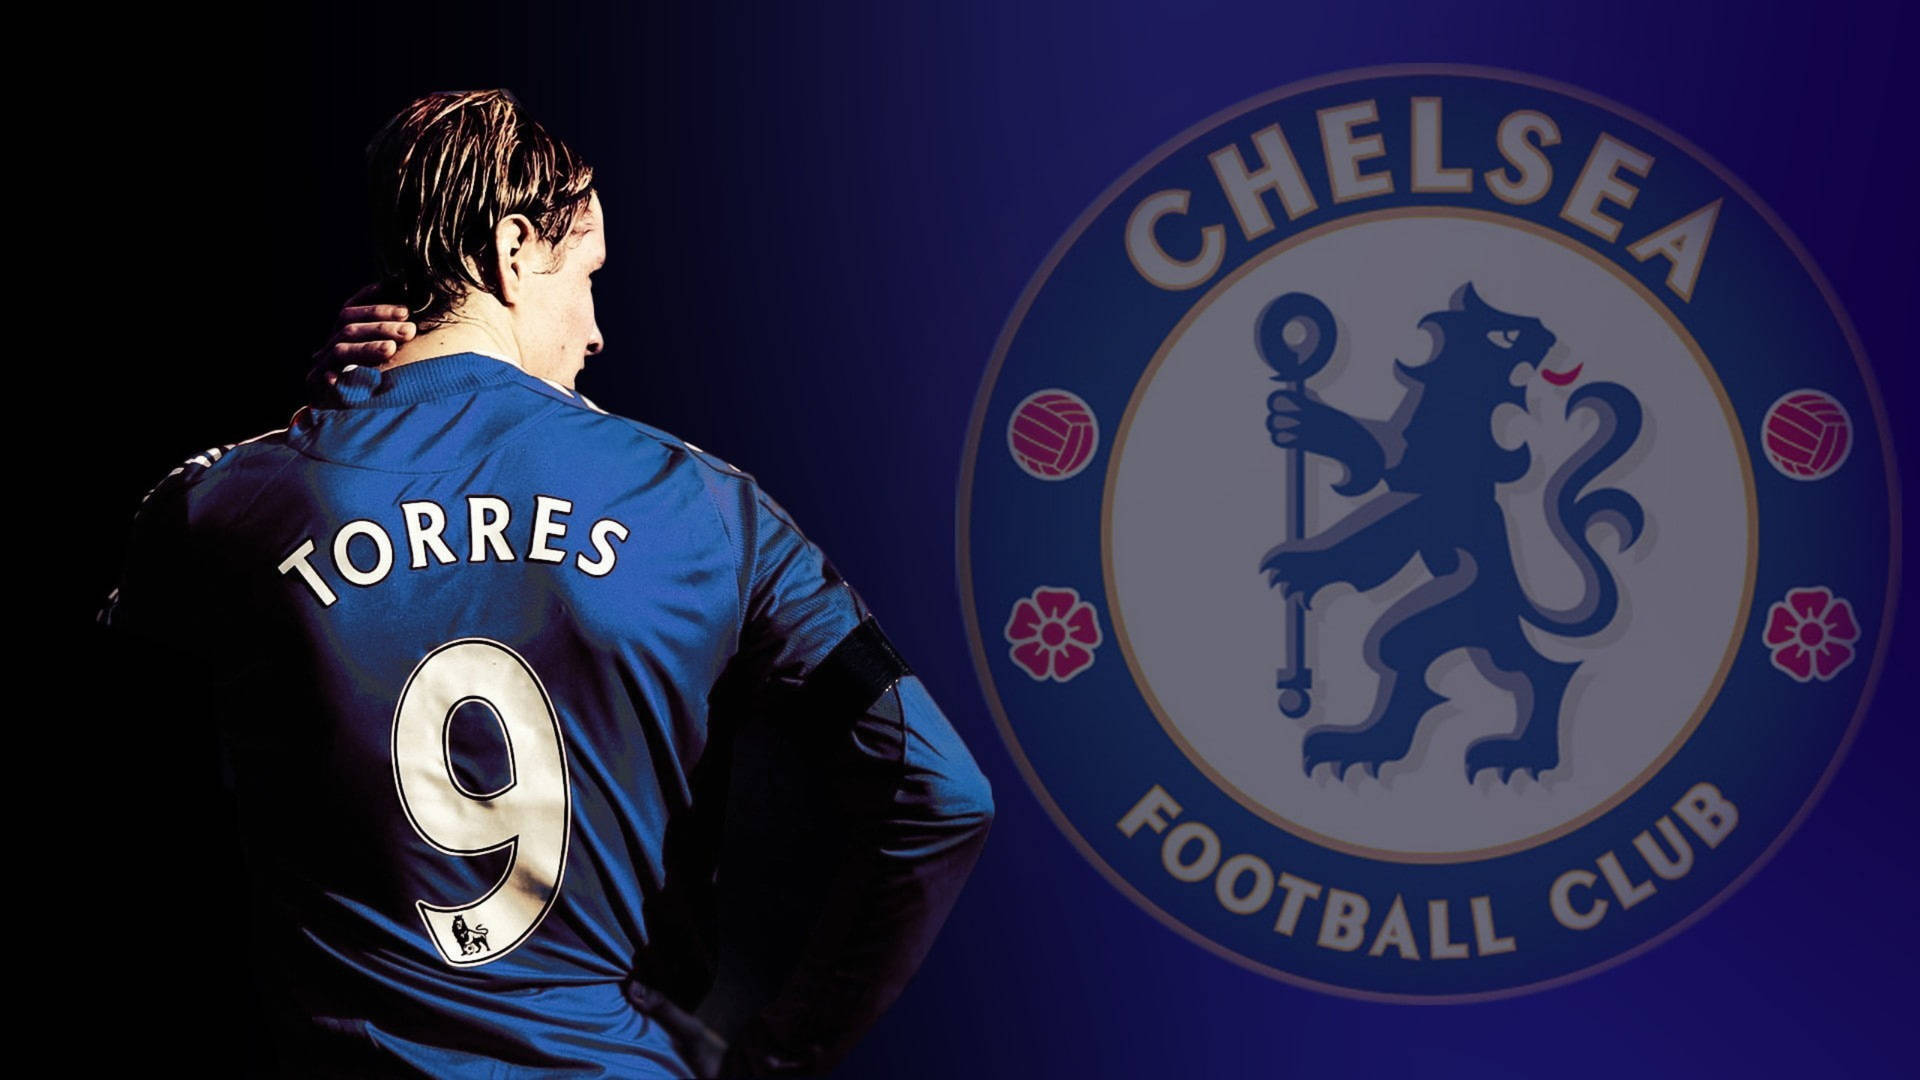 Chelsea 2560X1440 Wallpaper and Background Image